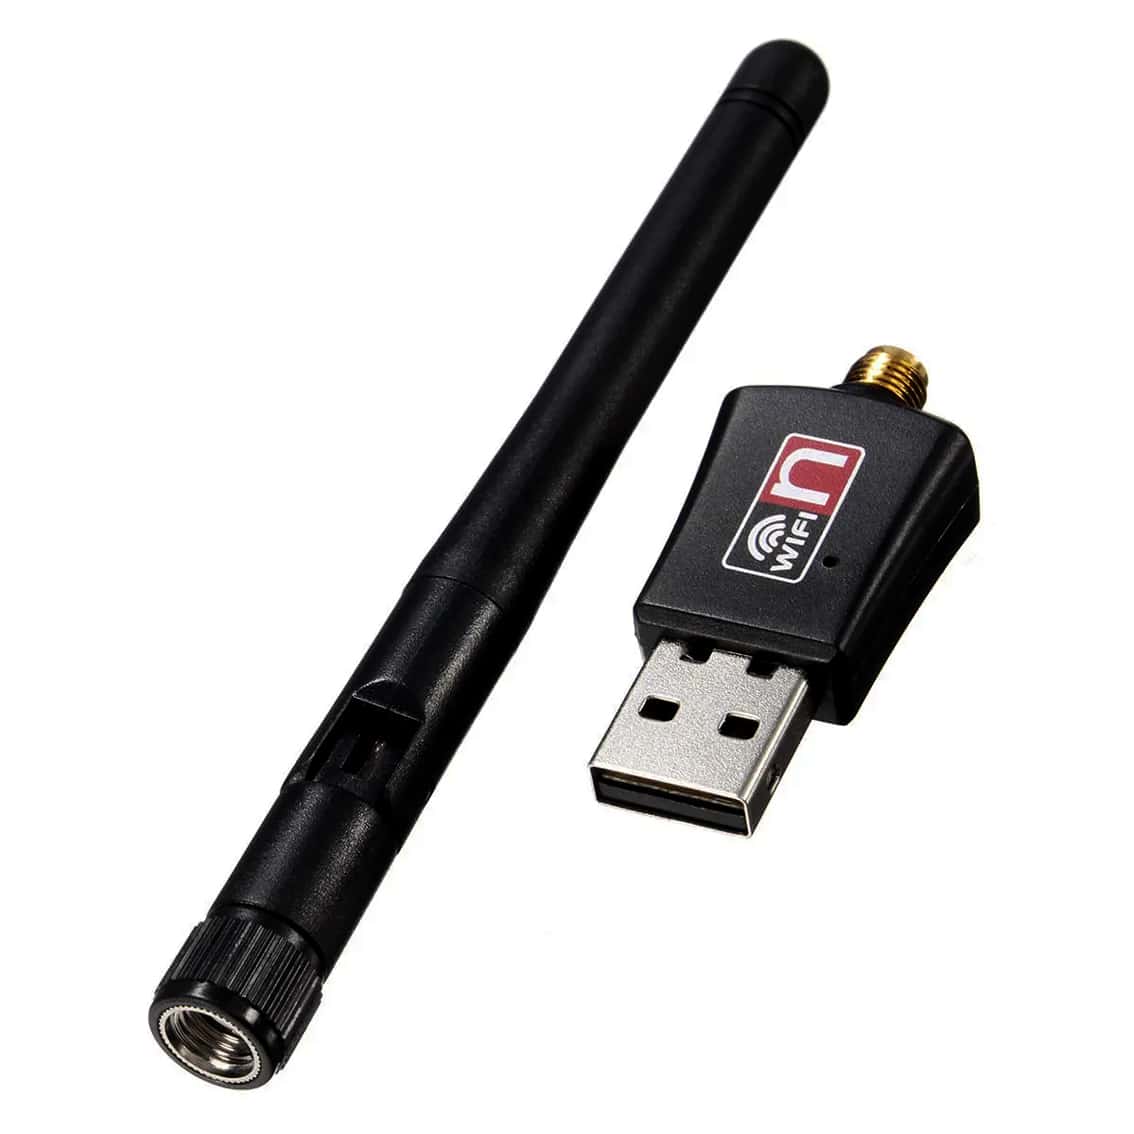 300Mbps USB Wireless-N WiFi Adapter with Antenna | Phipps Electronics